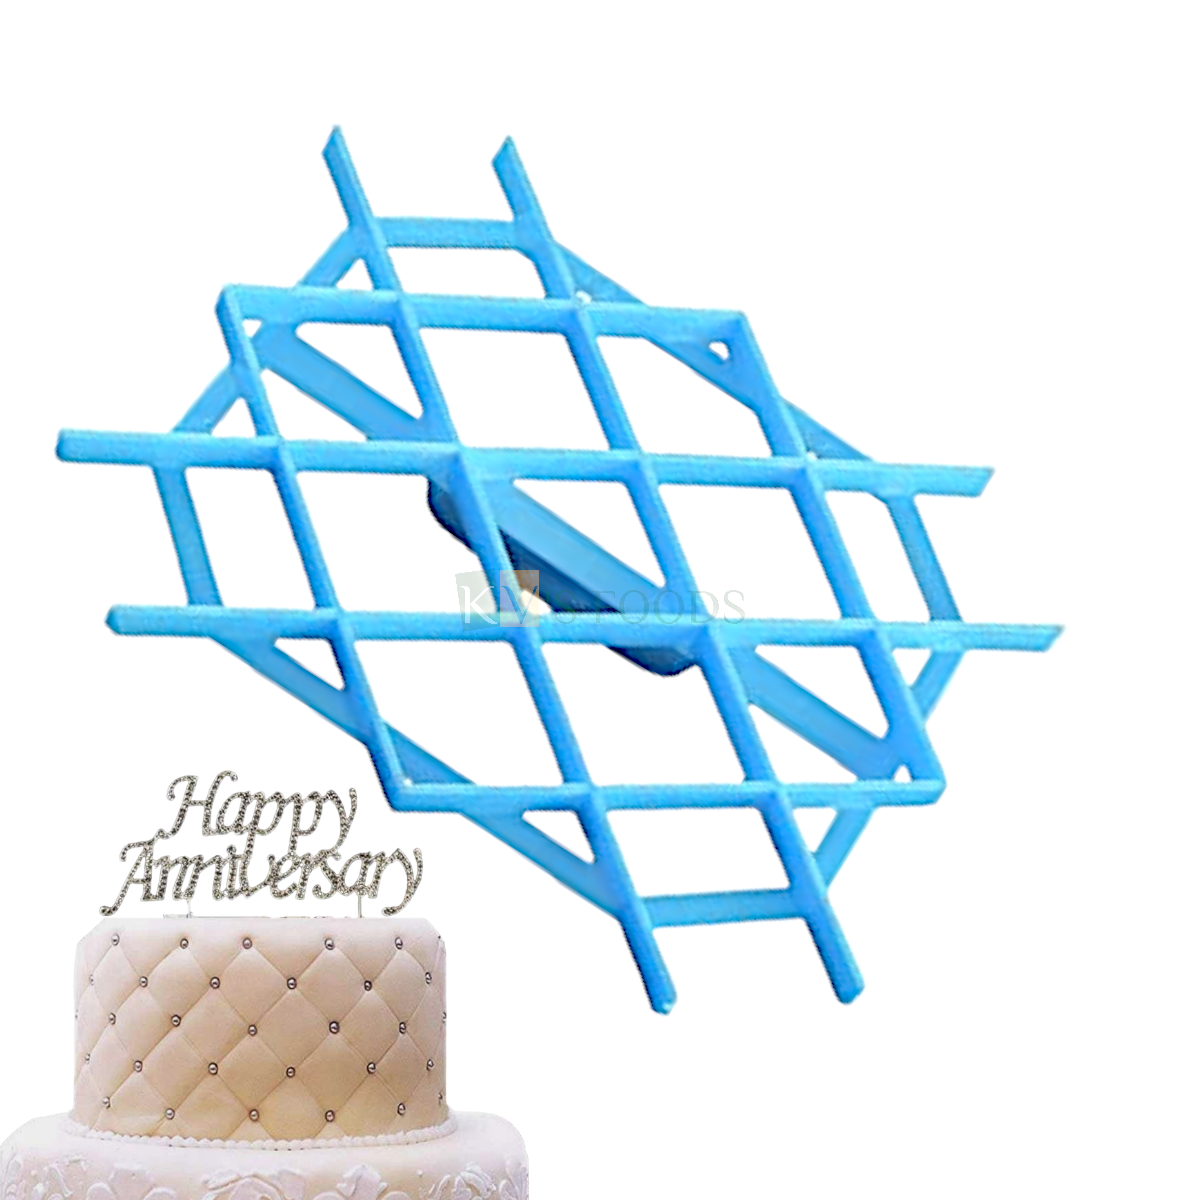 1 PC Silicone Light Blue Rhombus Diamond Shape Cake Edges Stamps Impression, Border Cakes Fondant Mould Tools Pattern Mat DIY Embossing Pad for Birthday Wedding Anniversary Baby Shower Cakes